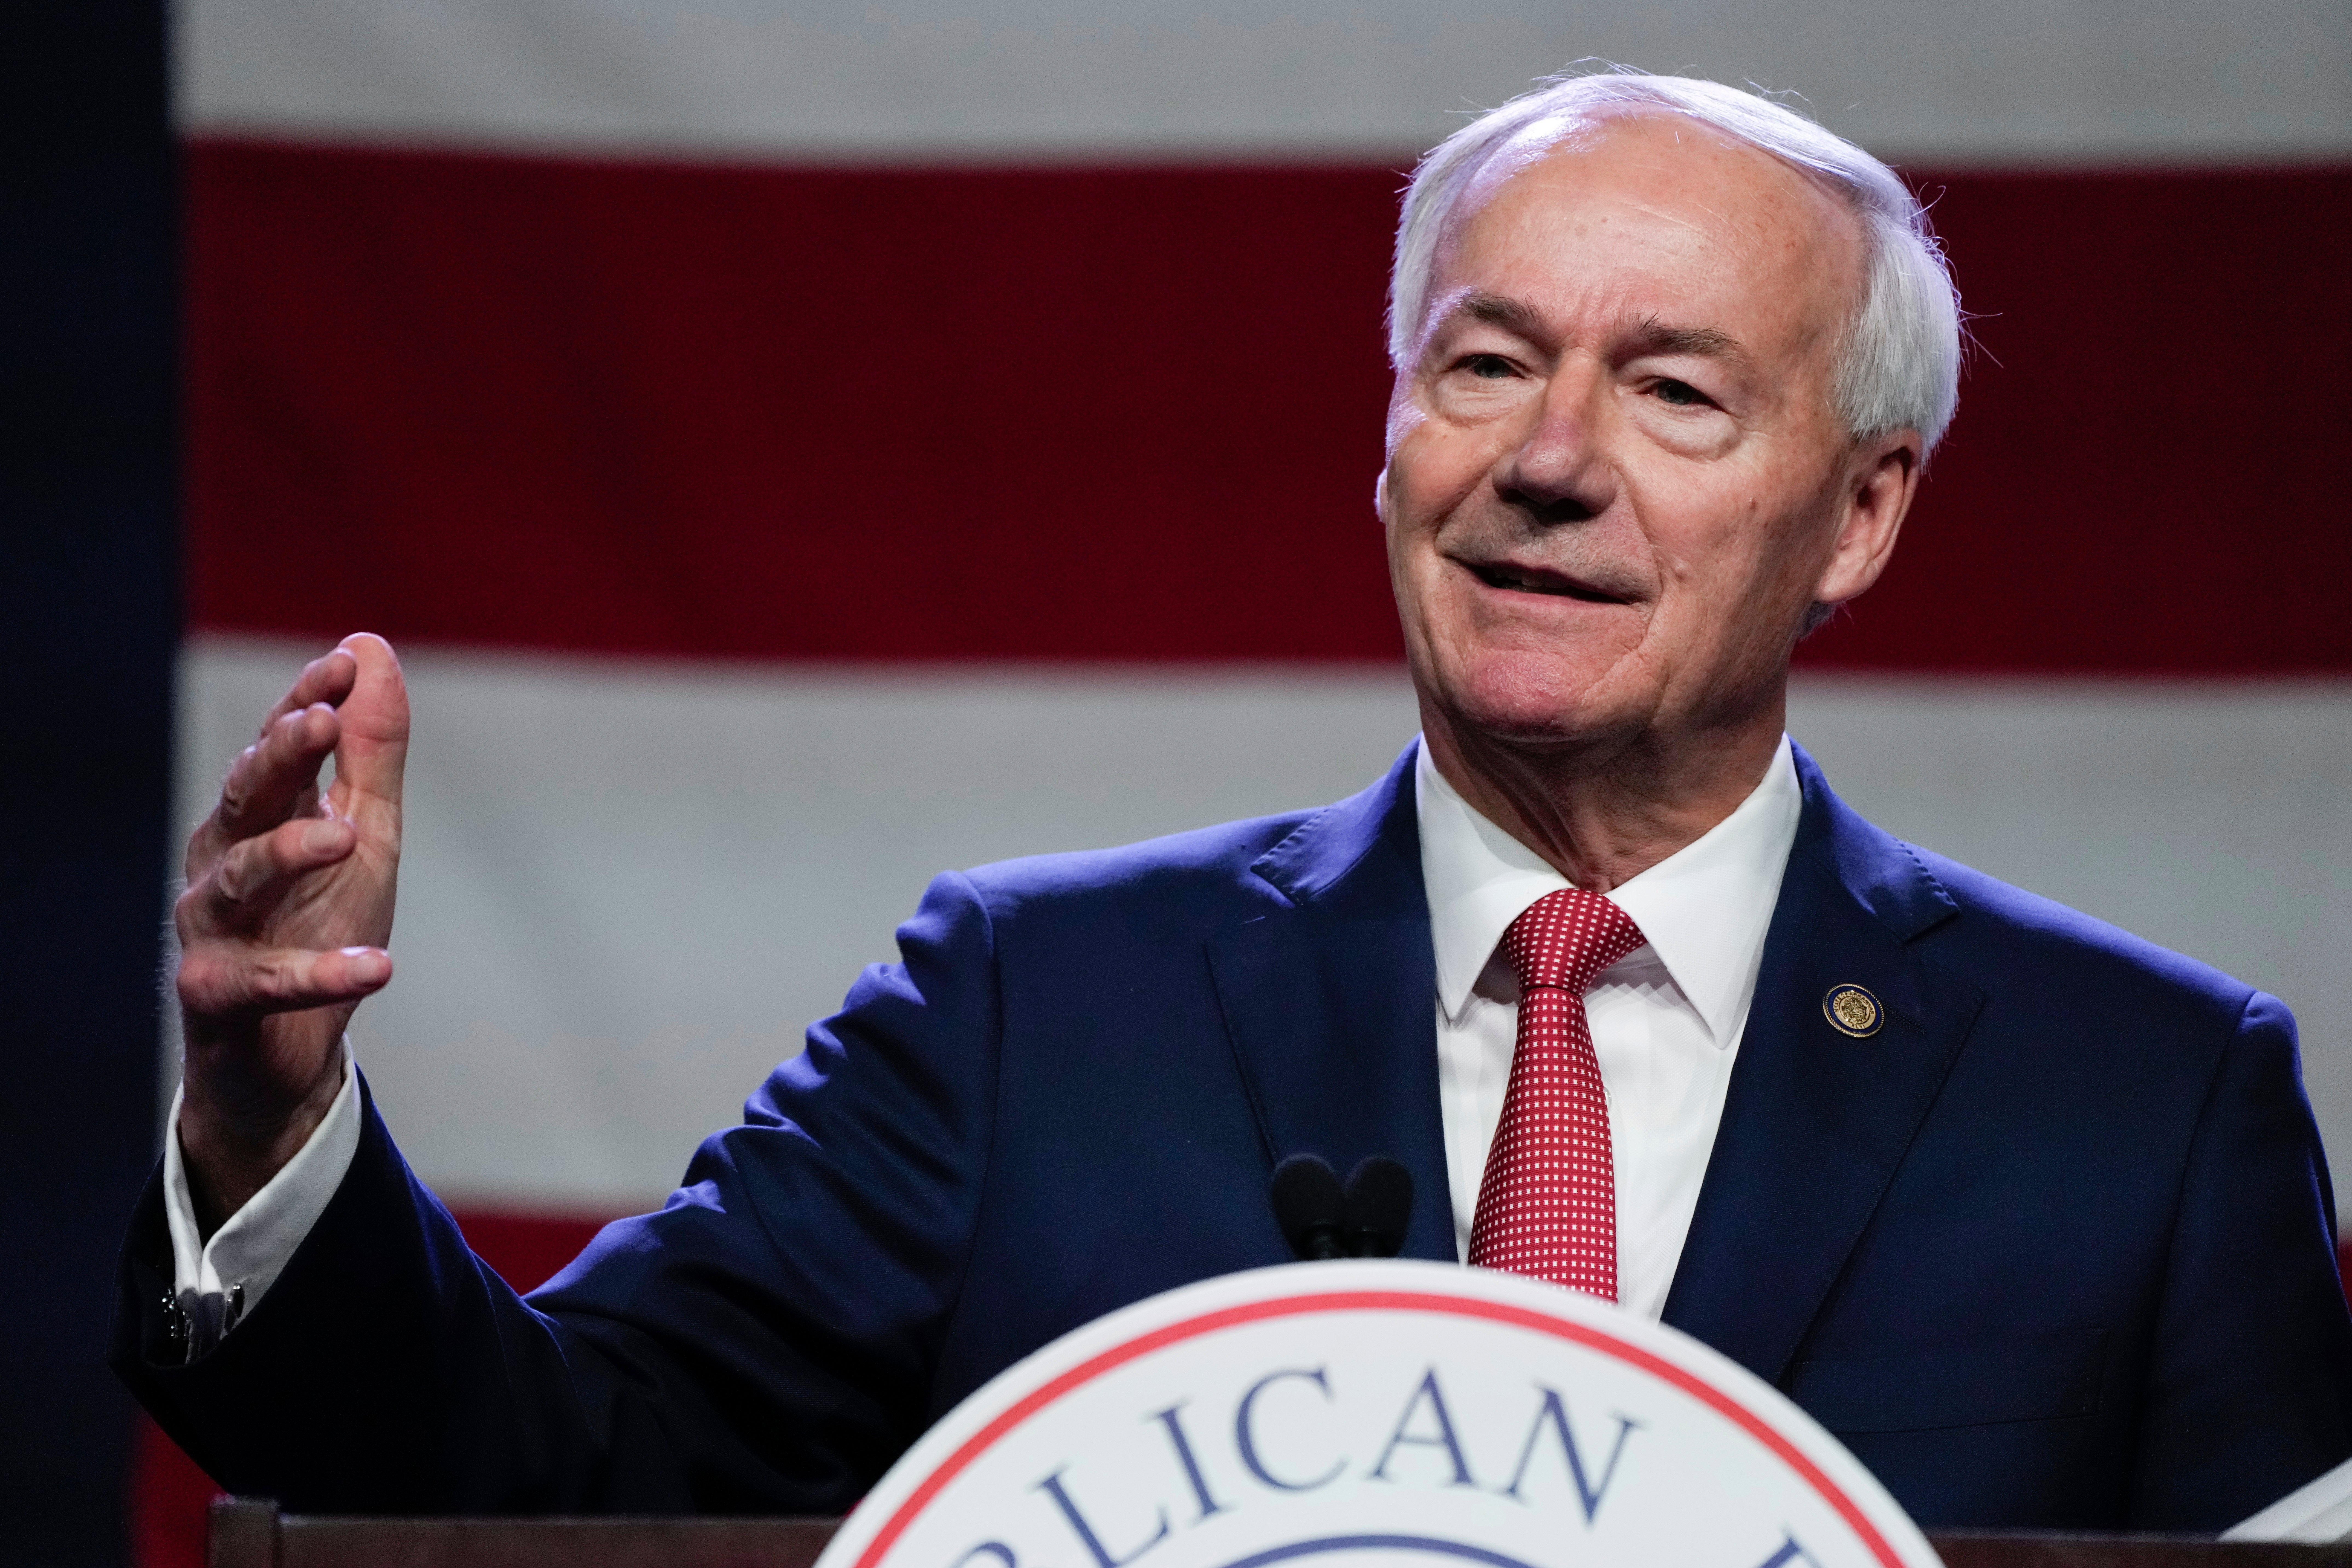 Asa Hutchinson hoped experience would win him support